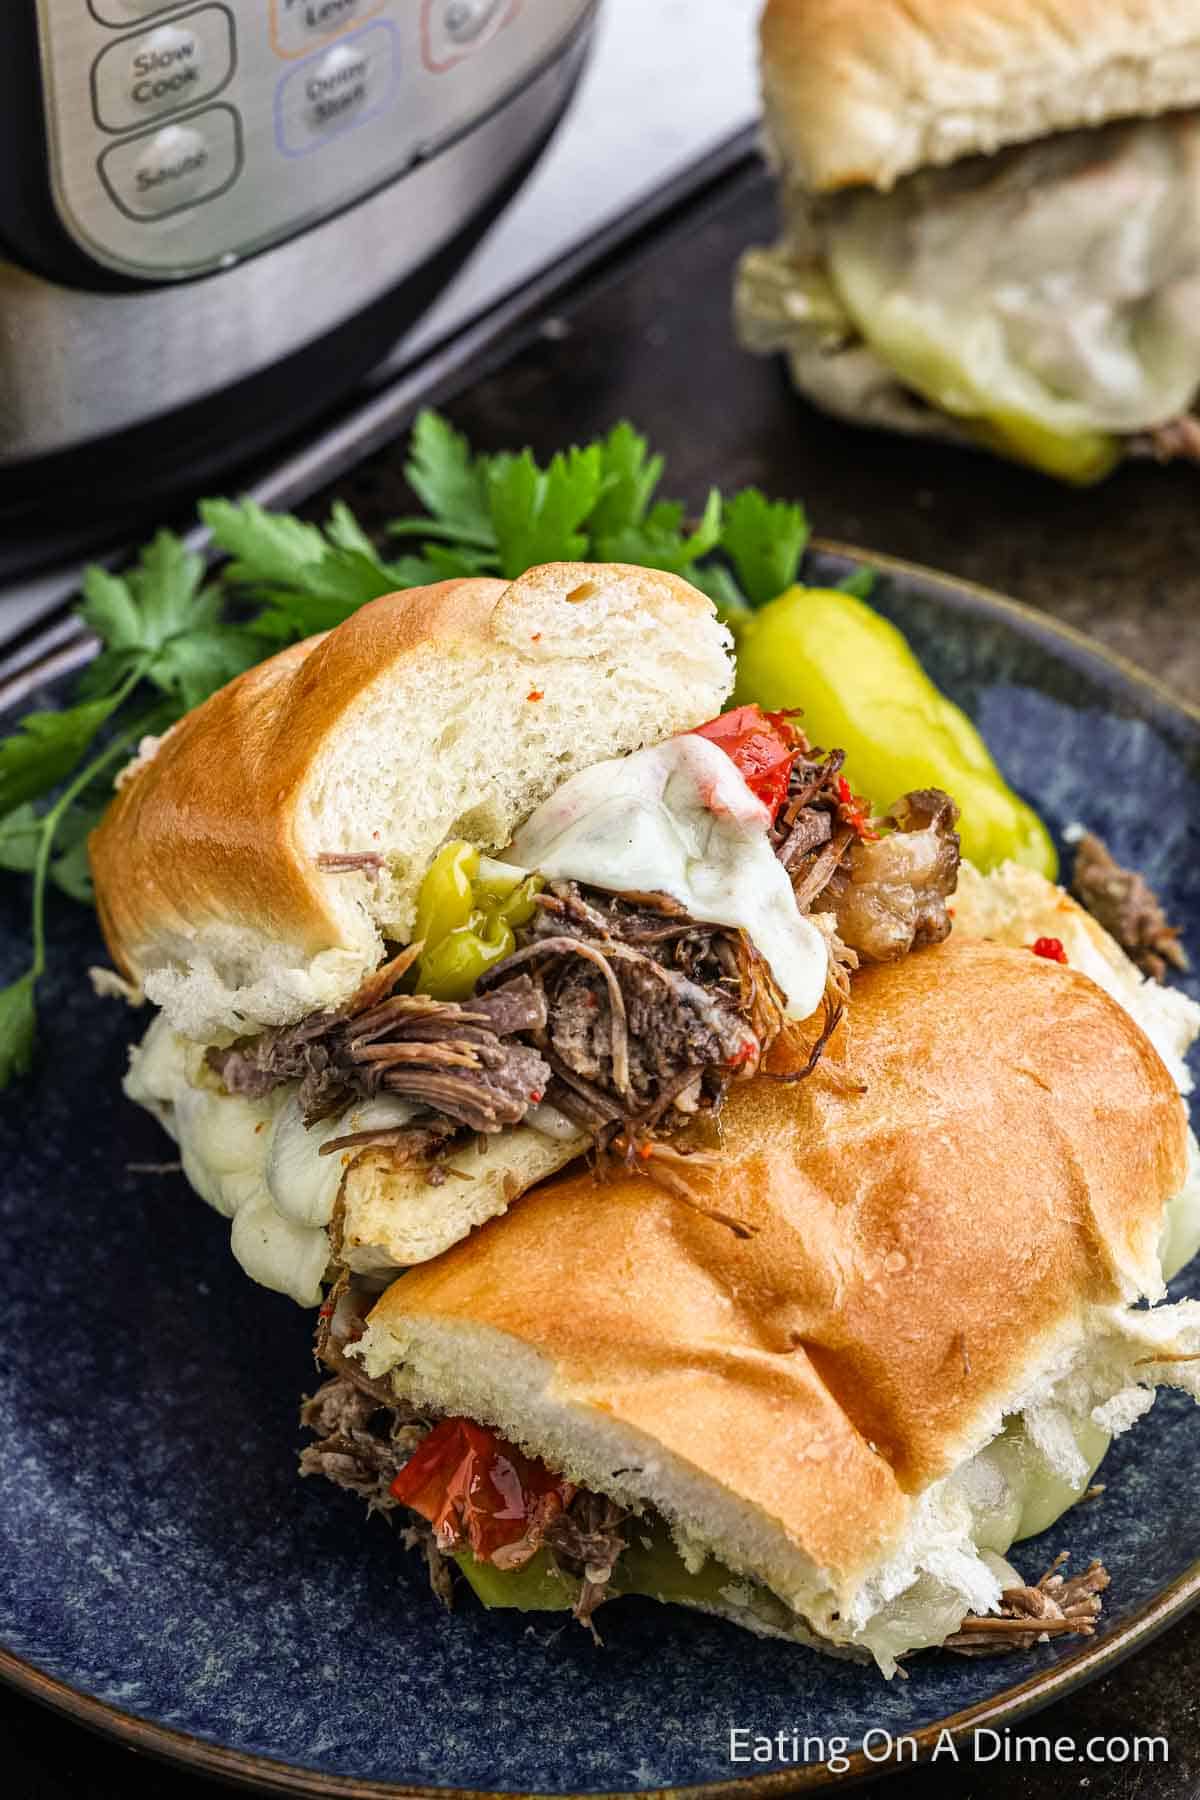 Italian Beef Sandwich cut in half with shredded beef topped with melted cheese and peppers on a plate